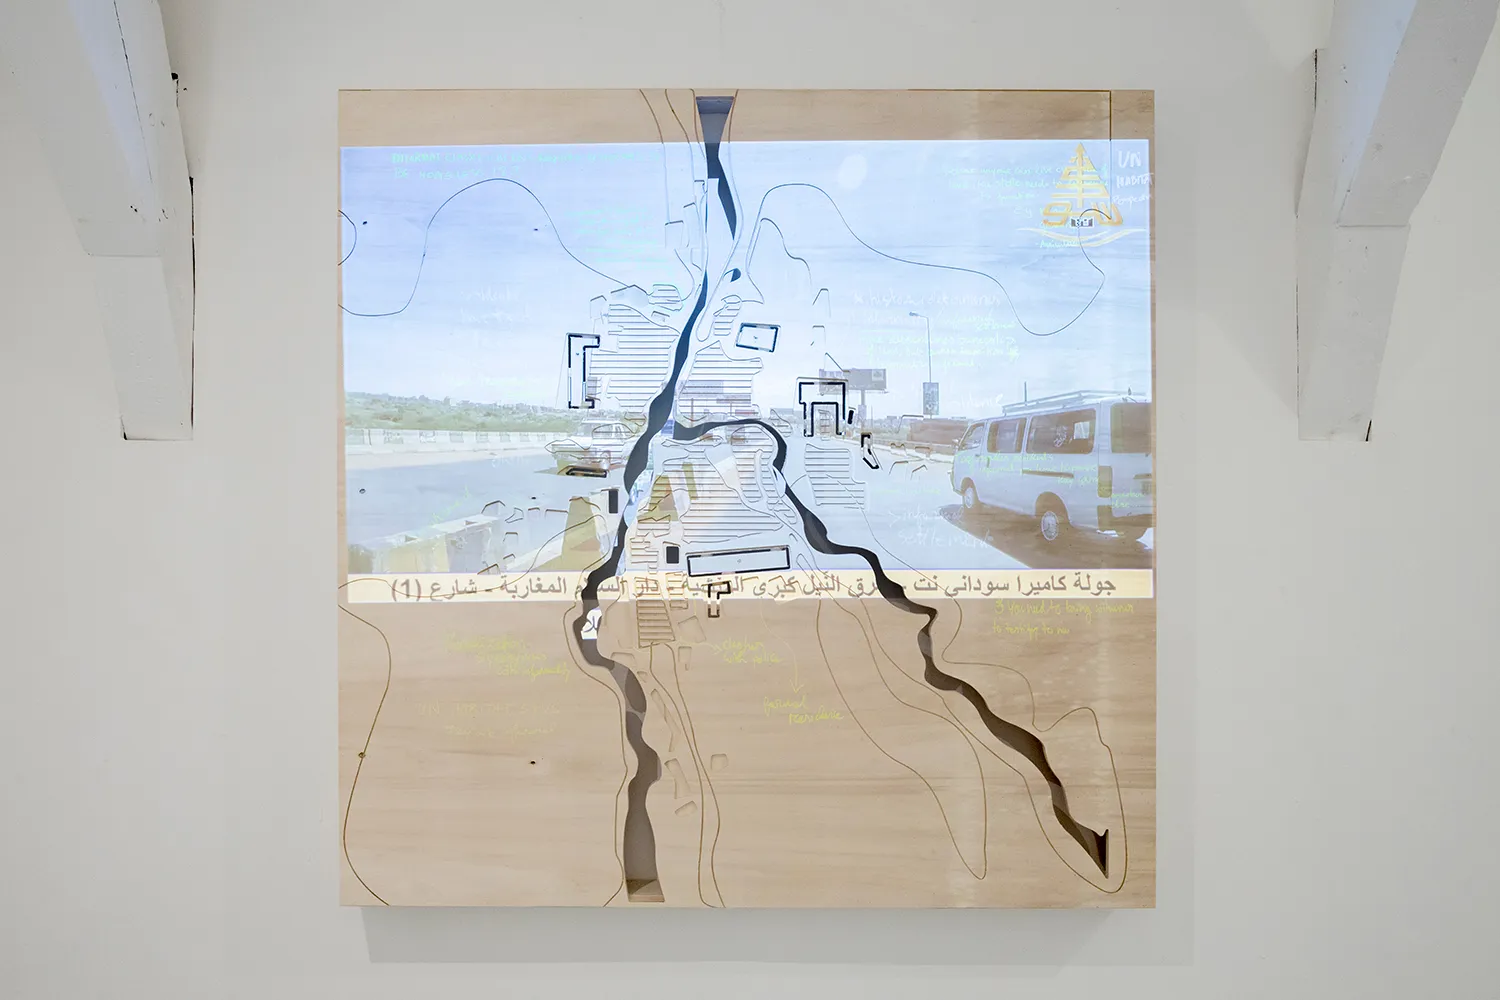 A map carved into a wooden board with various fluorescent annotations, onto which an image of a road with cars is projected